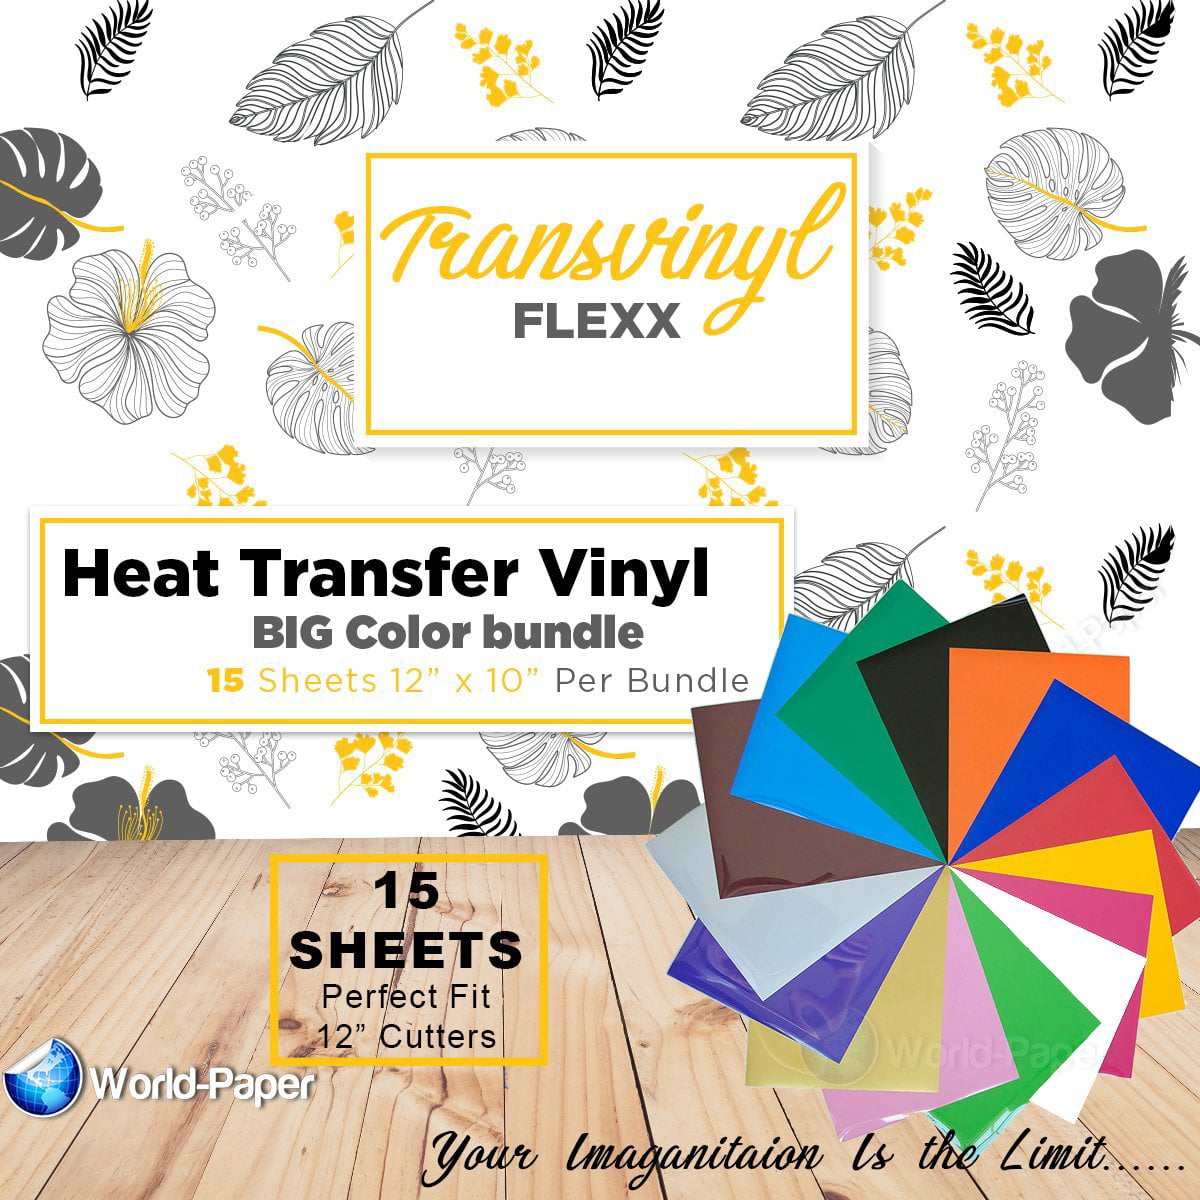 HIRALIY Heat Transfer Vinyl Bundle 30 Pack 12 x 12 Iron On Vinyl for T-Shirt HTV Sheets Plus 3 Pack Cutting Mats with Easy Weed Tool and Scrapers for Cricut Brother Craft Cutters Silhouette Cameo